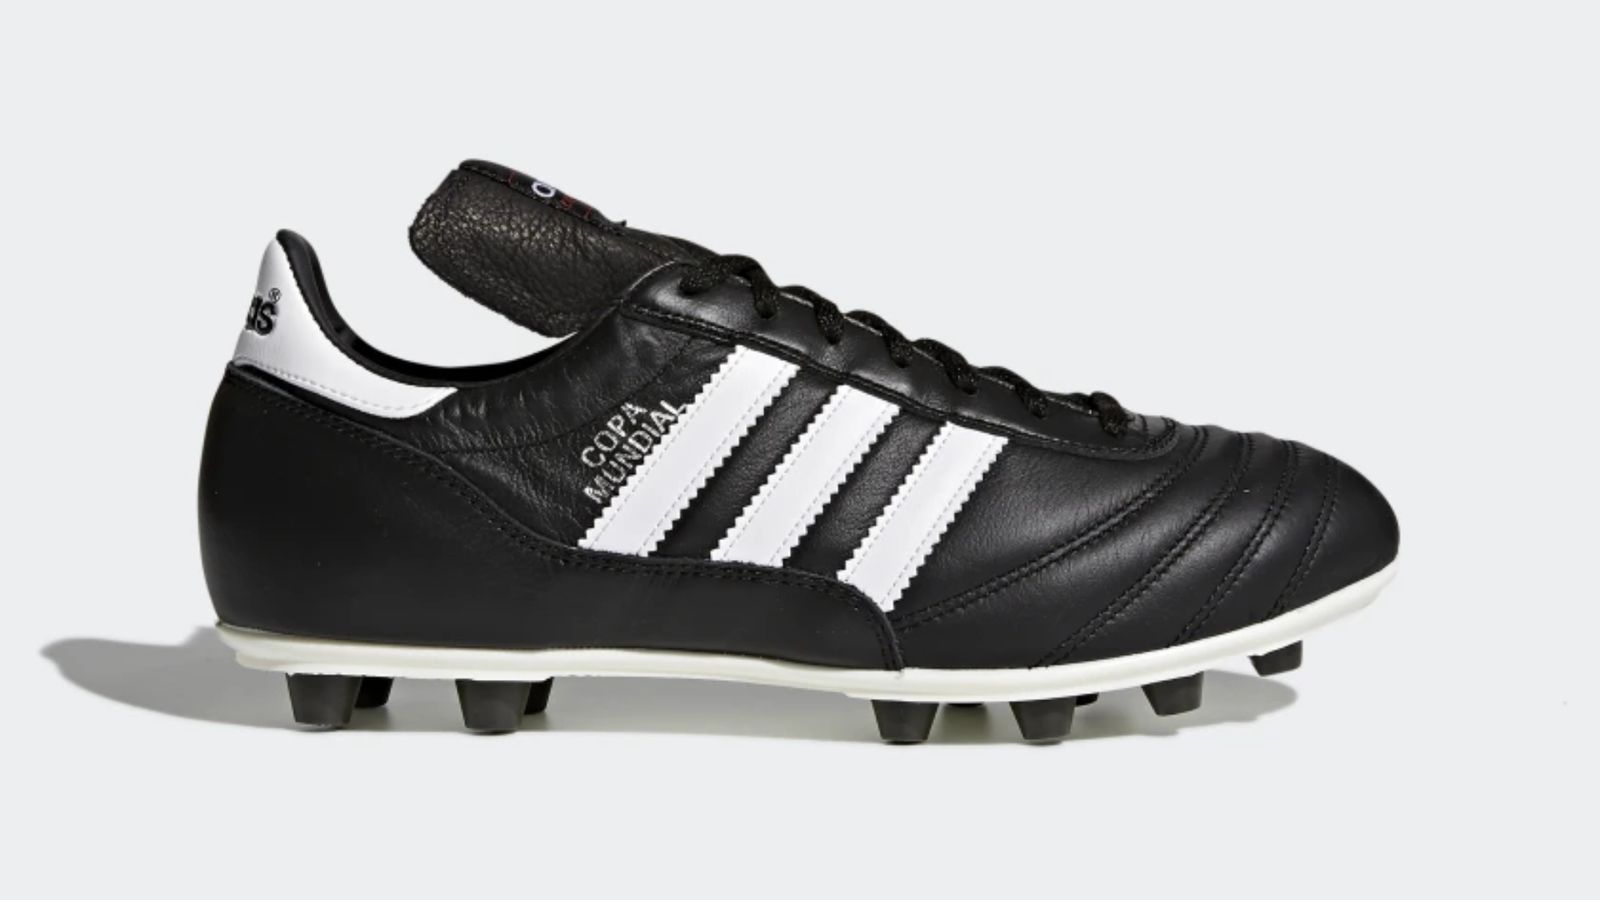 adidas Copa Mundial product image of a black football boot with white accents and adidas branding.